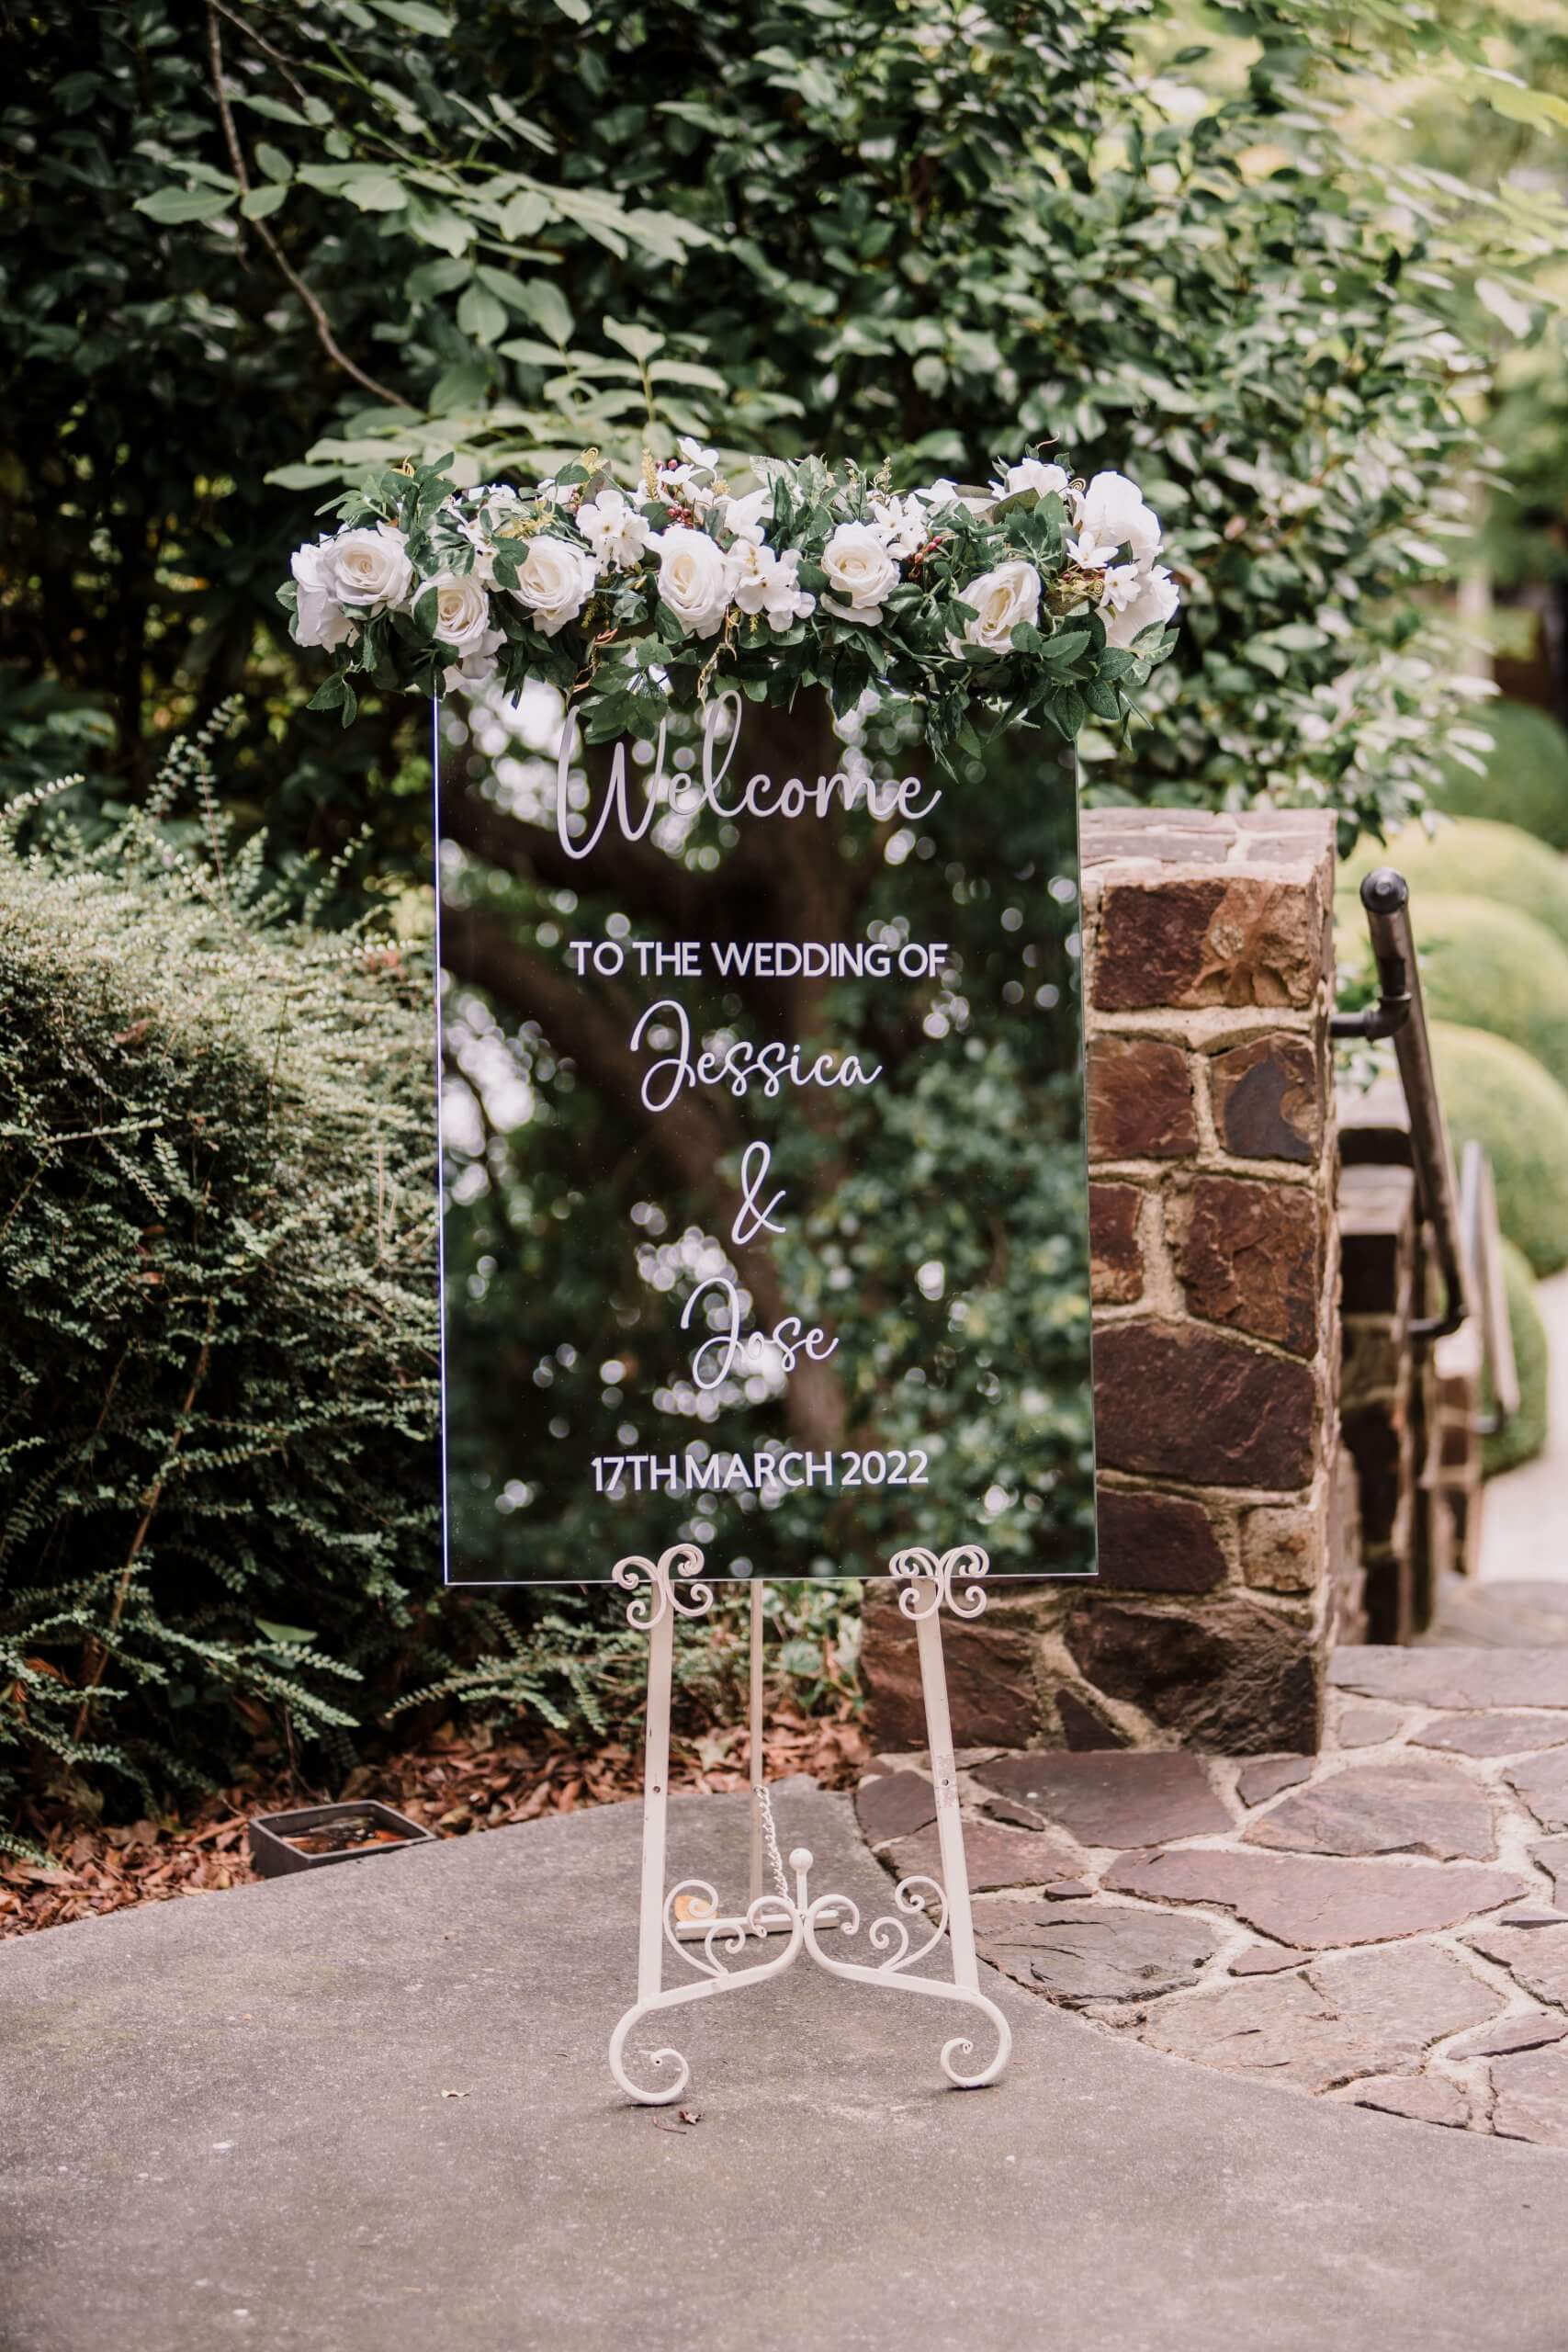 Welcome to our wedding signage for Jessica and Jose.